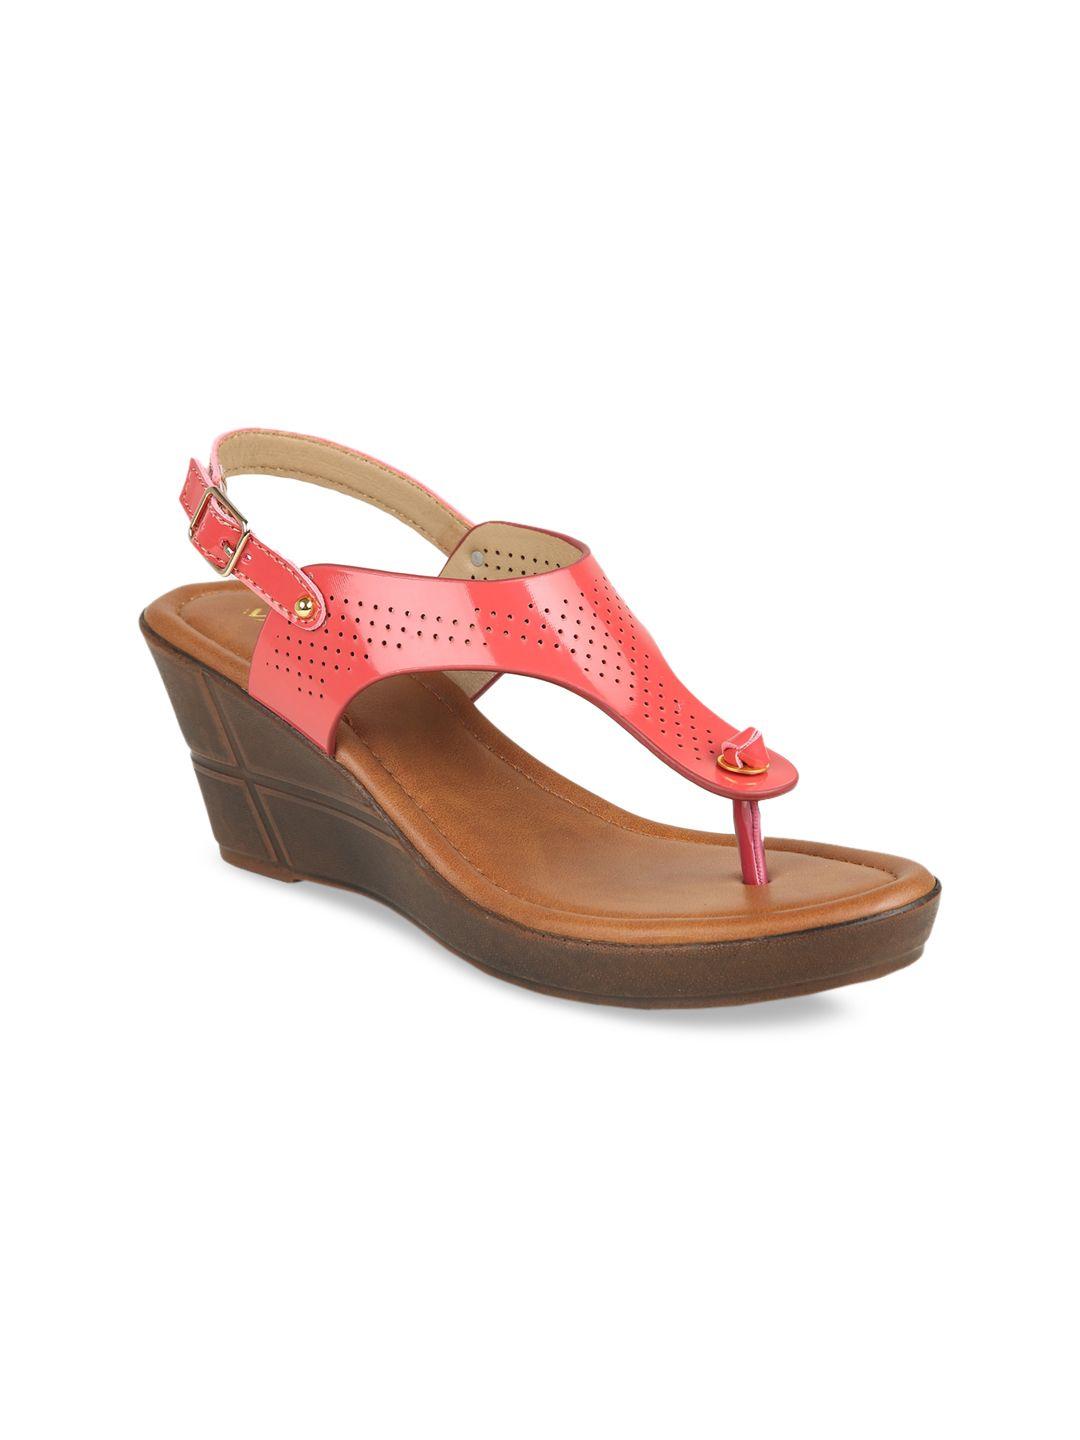 valiosaa coral pink wedge sandals with laser cuts